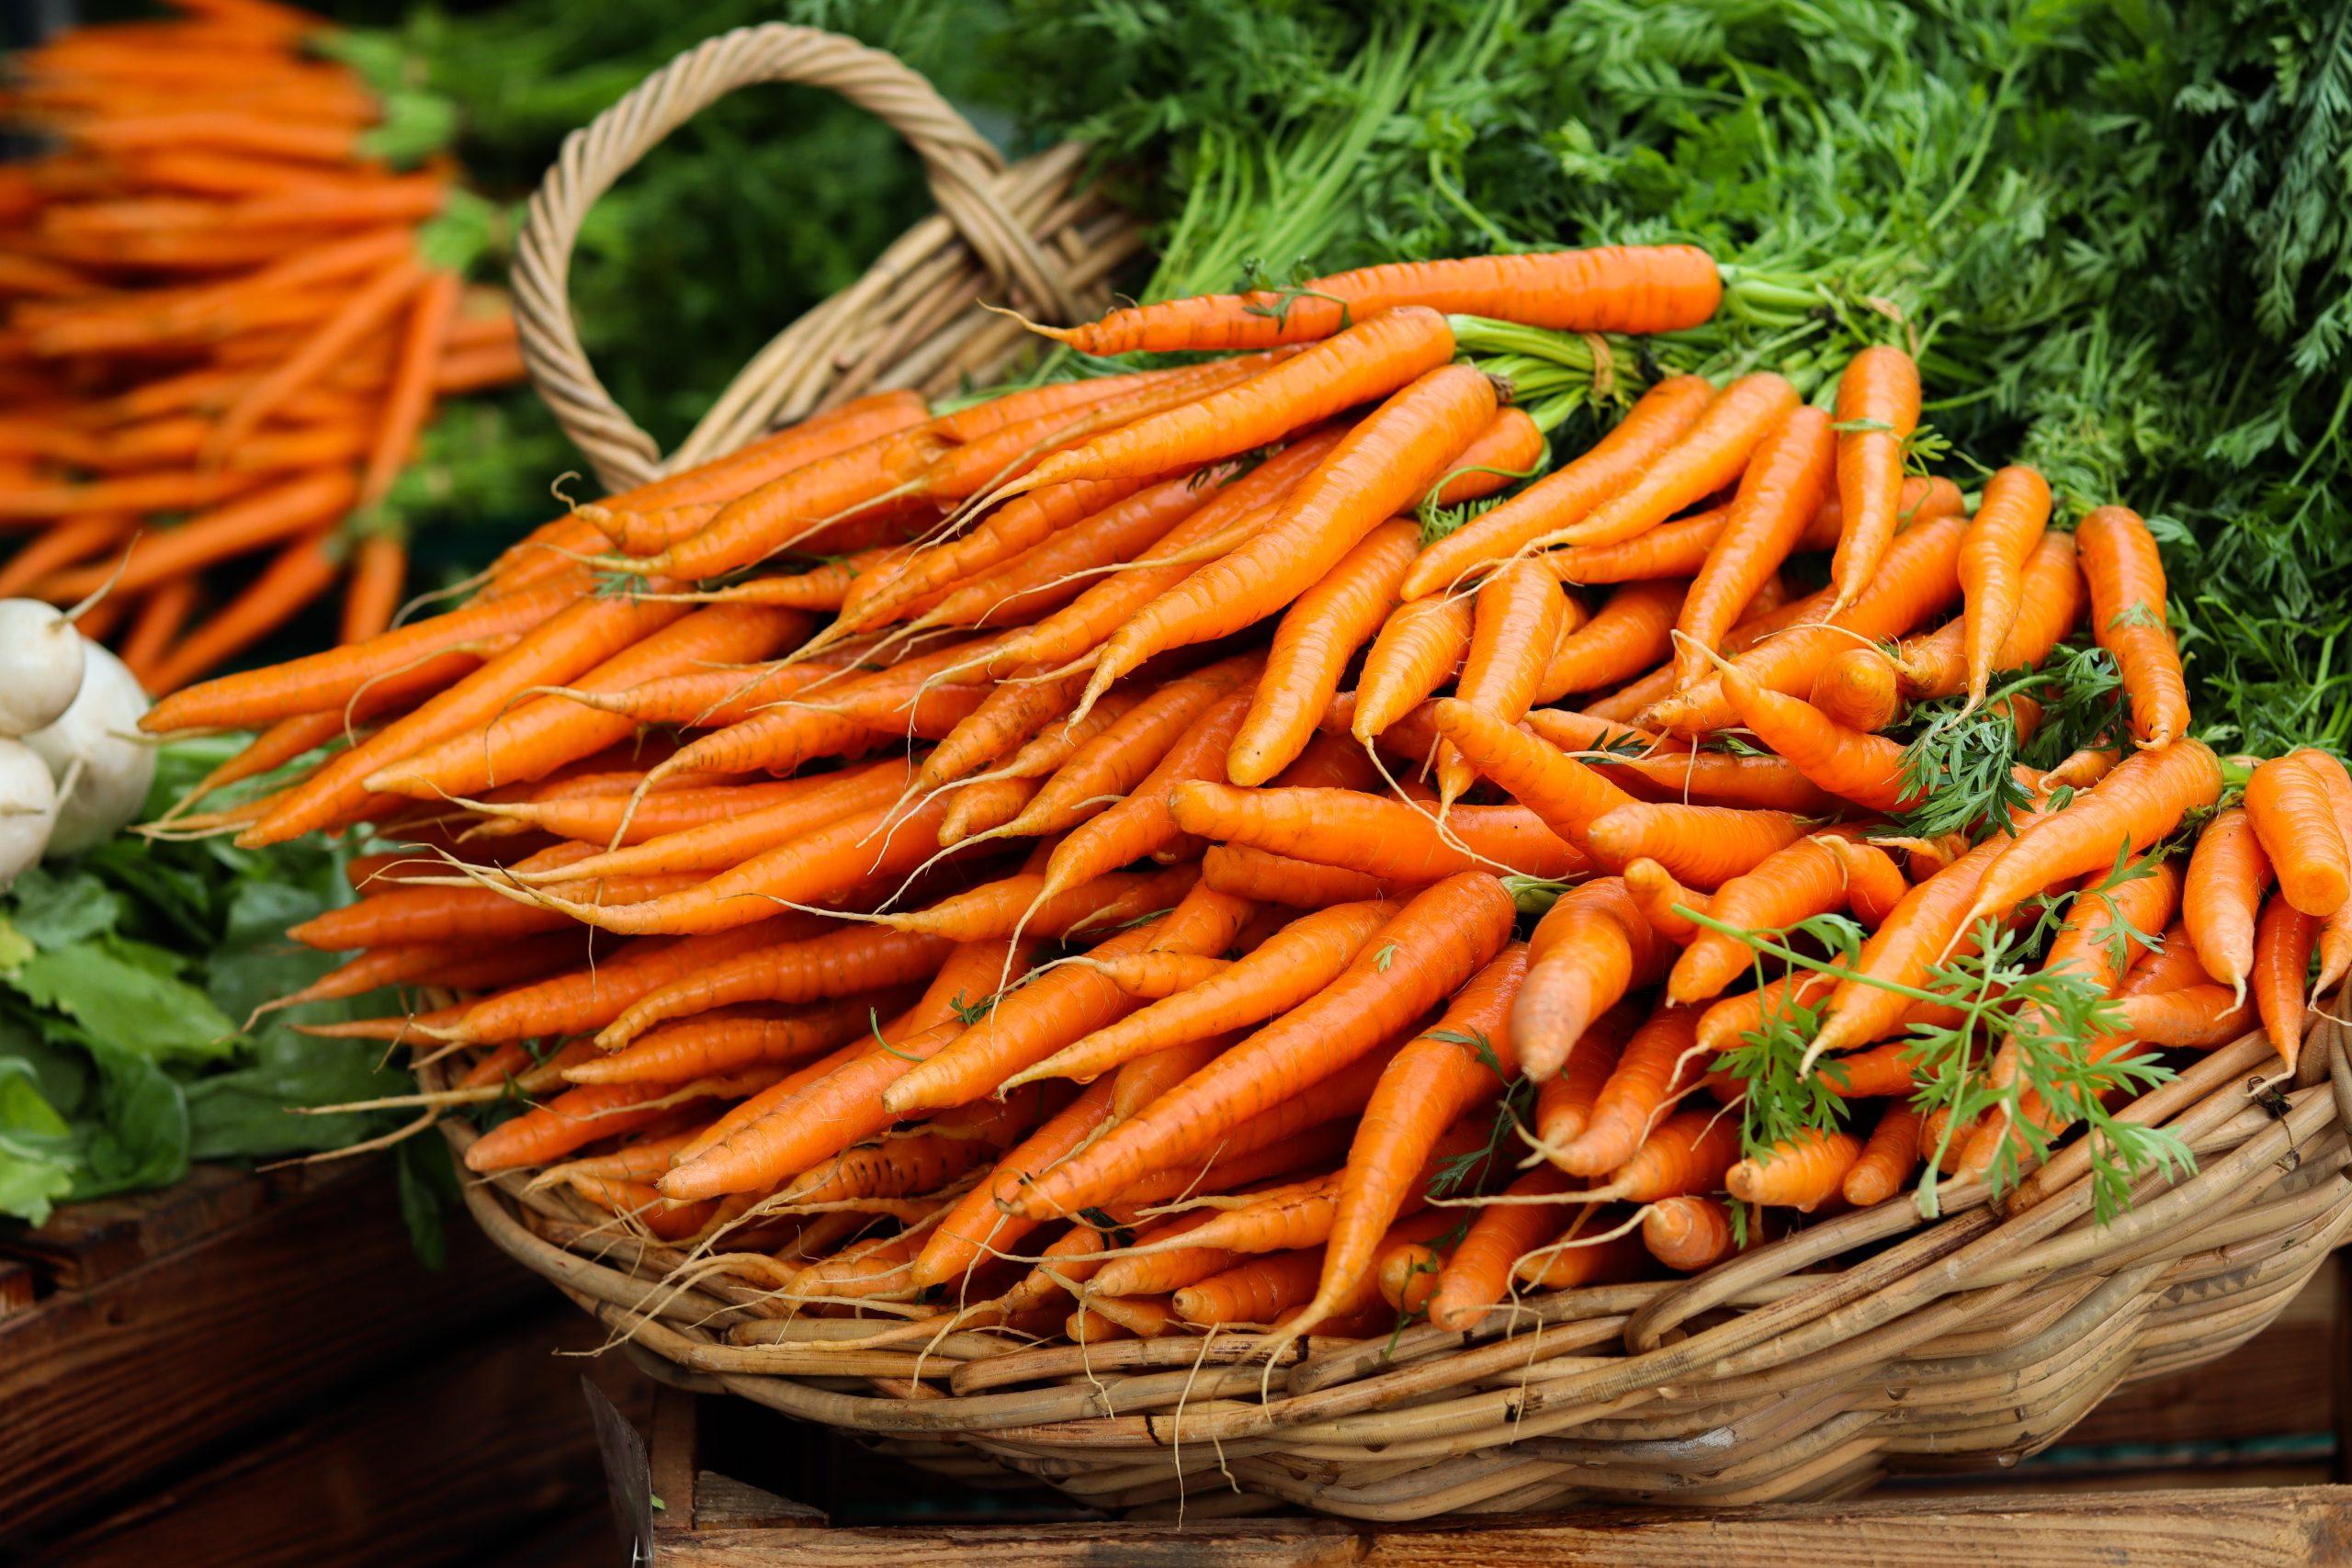 What is Vitamin A?